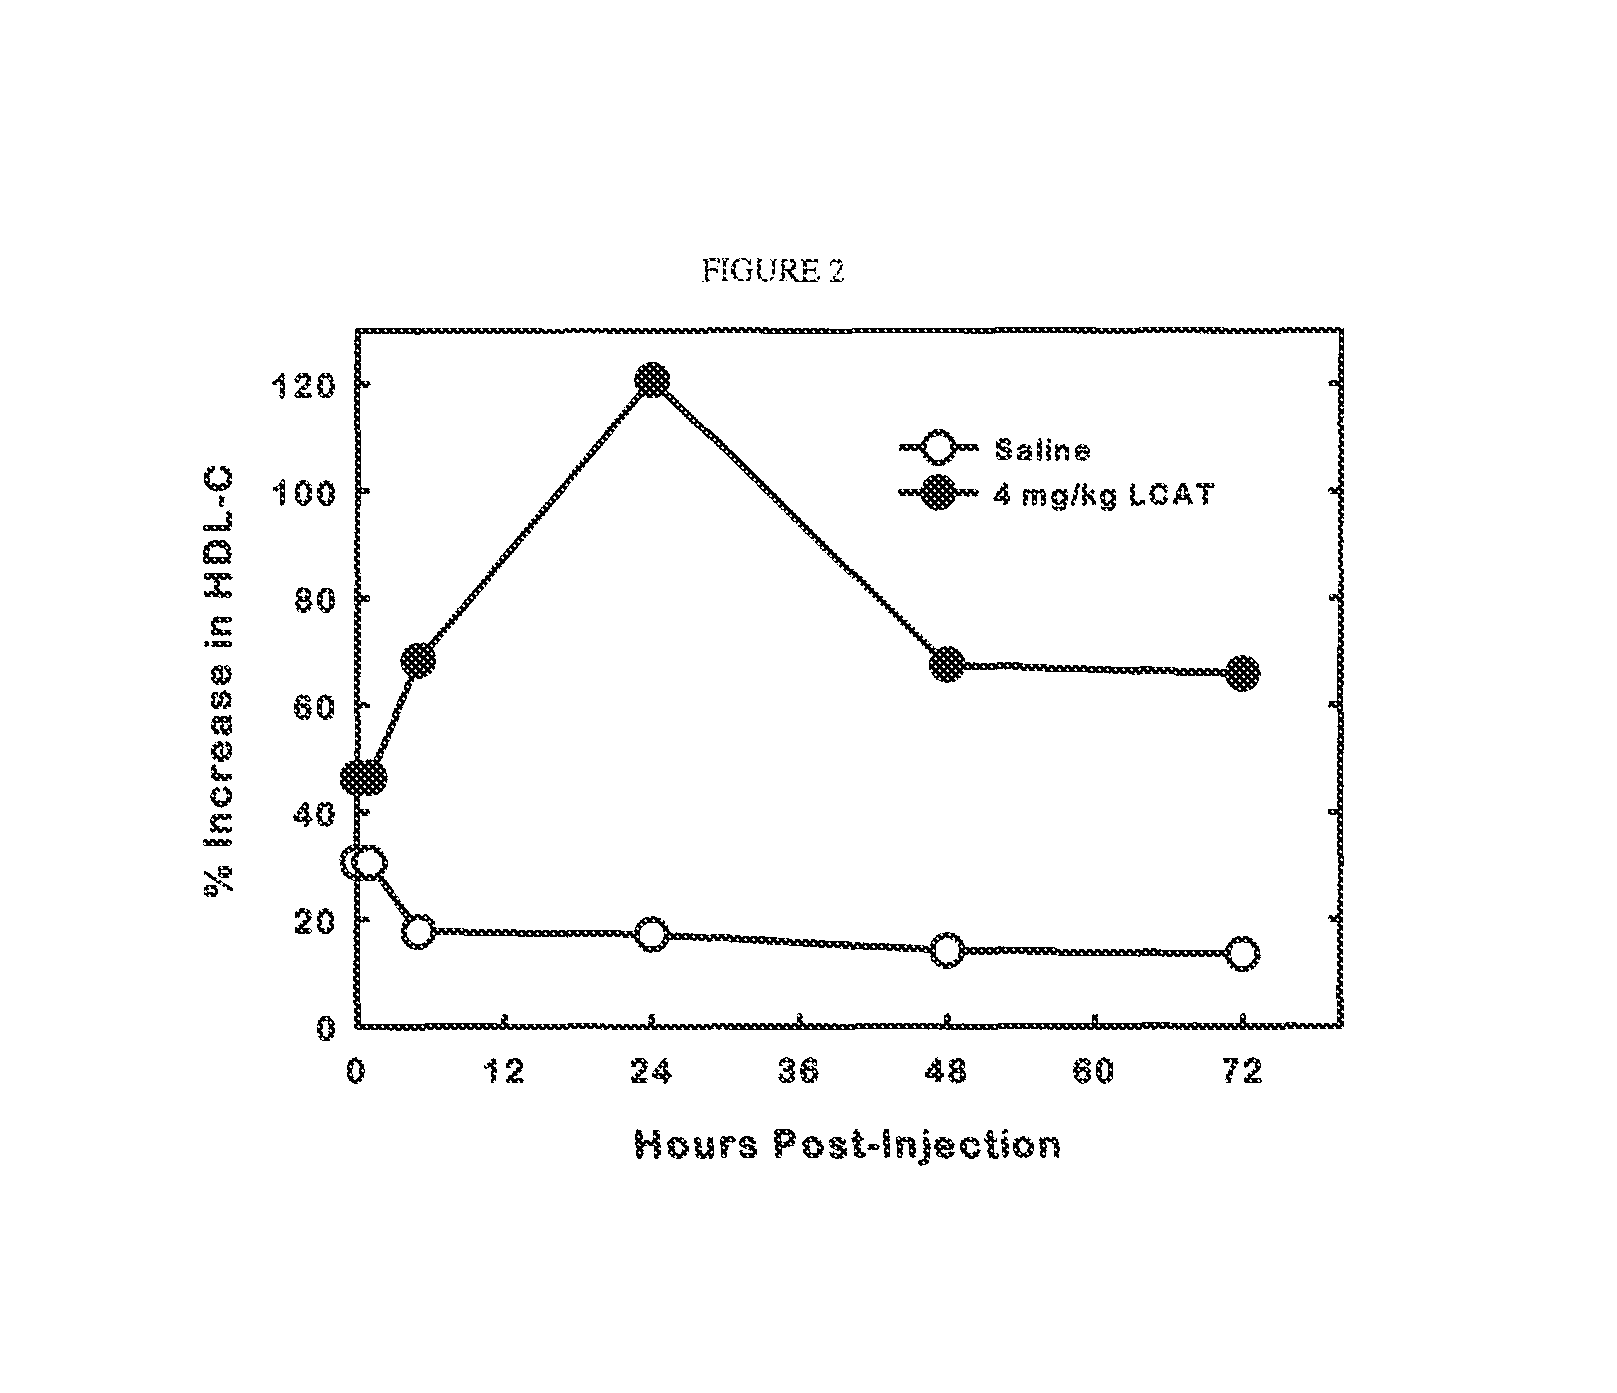 Methods of treating anemia and red blood cell dysfunction with lecithin cholesterol acyltransferase